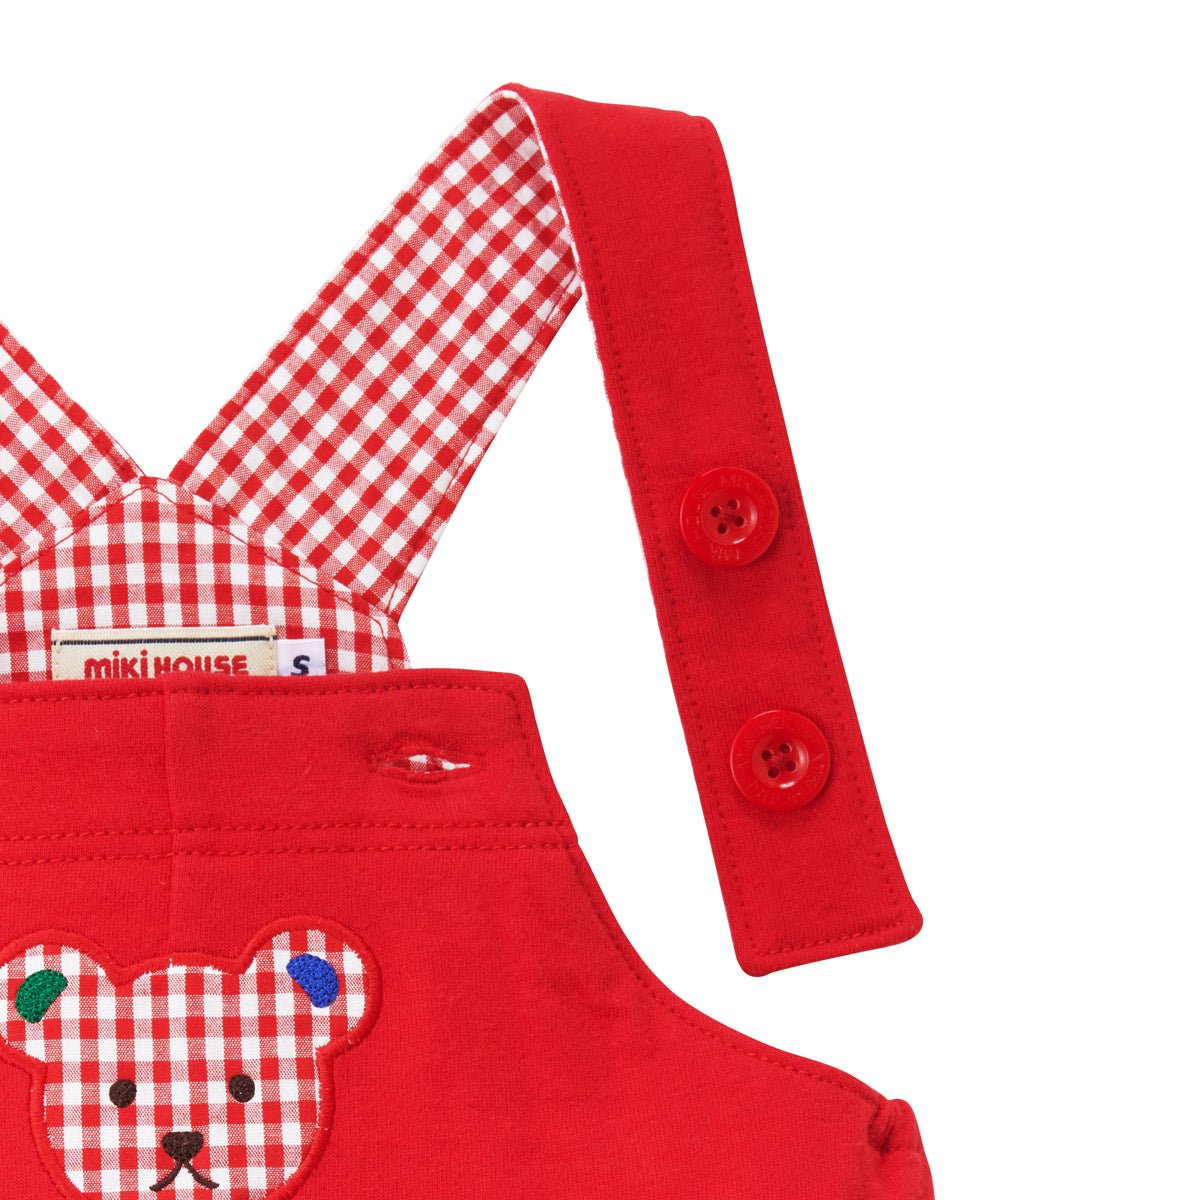 Gingham Teddy Overalls - 10-3332-828-02-S